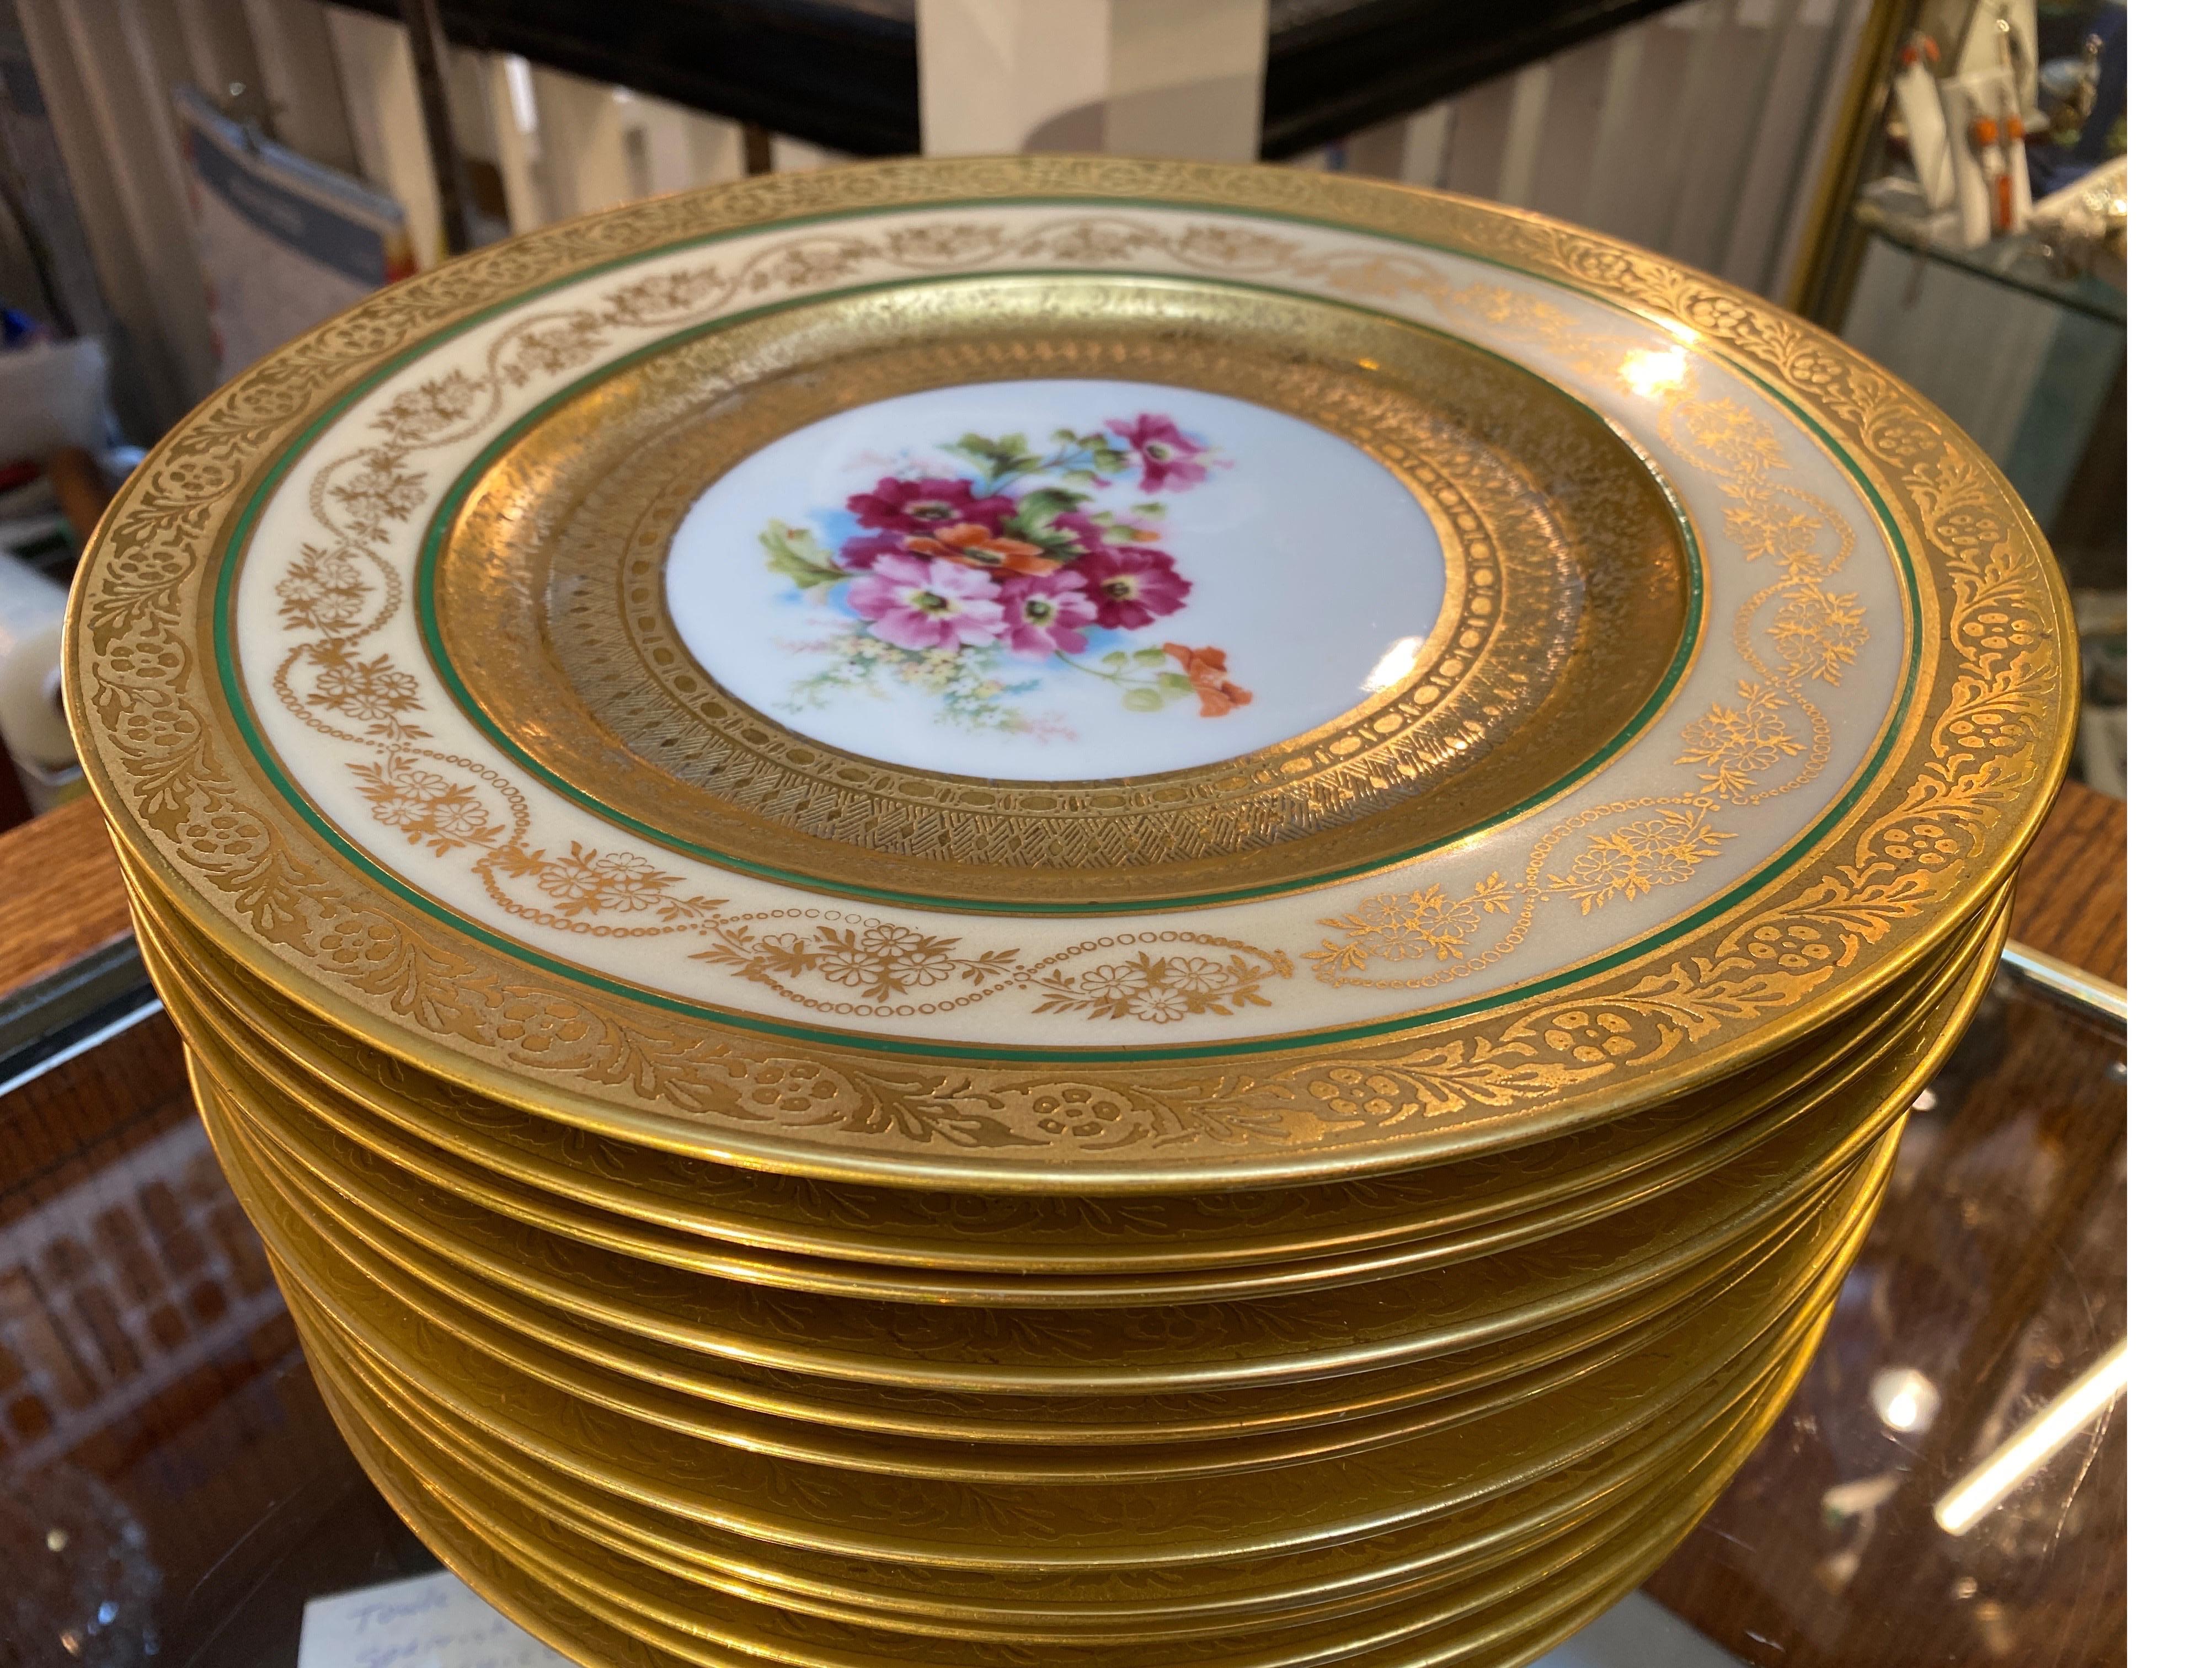 Set of 12 Gold Encrusted Floral Service Dinner Plates, 1920's Germany 1